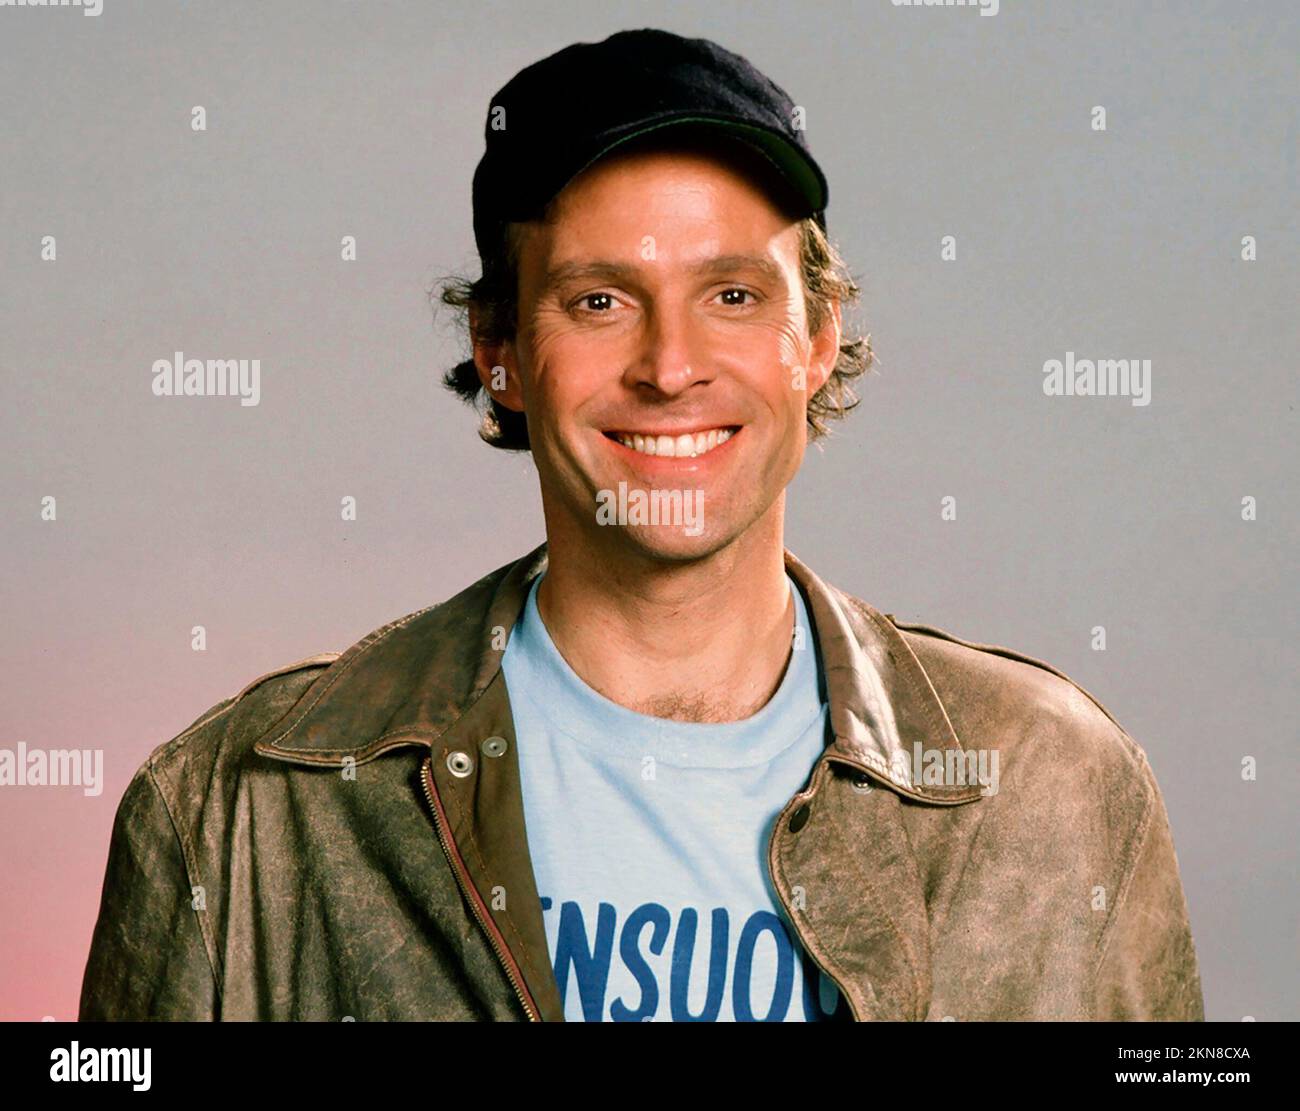 DWIGHT SCHULTZ in THE A-TEAM (1983), directed by STEPHEN J. CANNELL and FRANK LUPO. Credit: STEPHEN J. CANNELL PRODUCTIONS/UNIVERSAL TV / Album Stock Photo